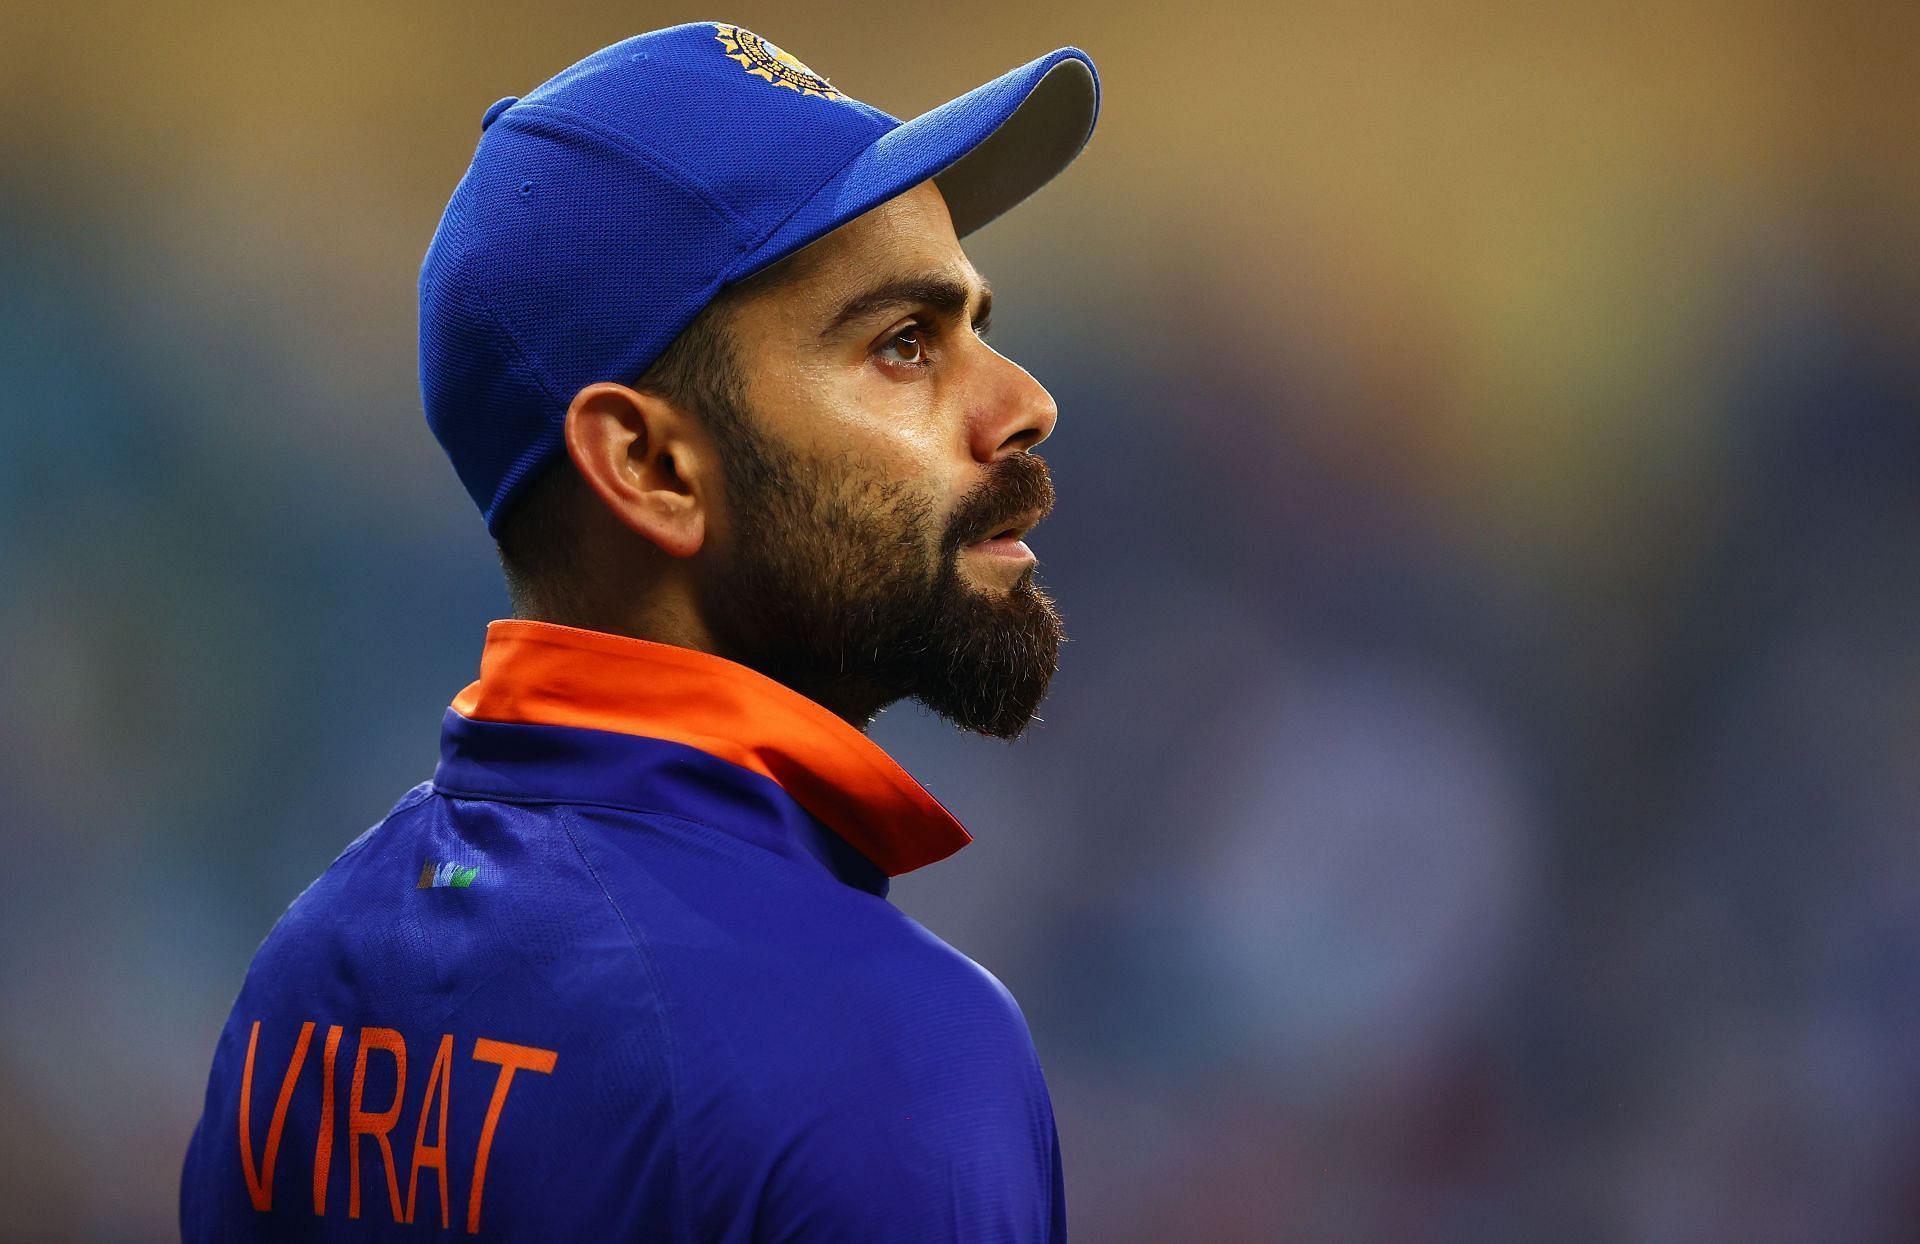 There will be no dearth of the dirt slung at Virat Kohli if things go south in the near future